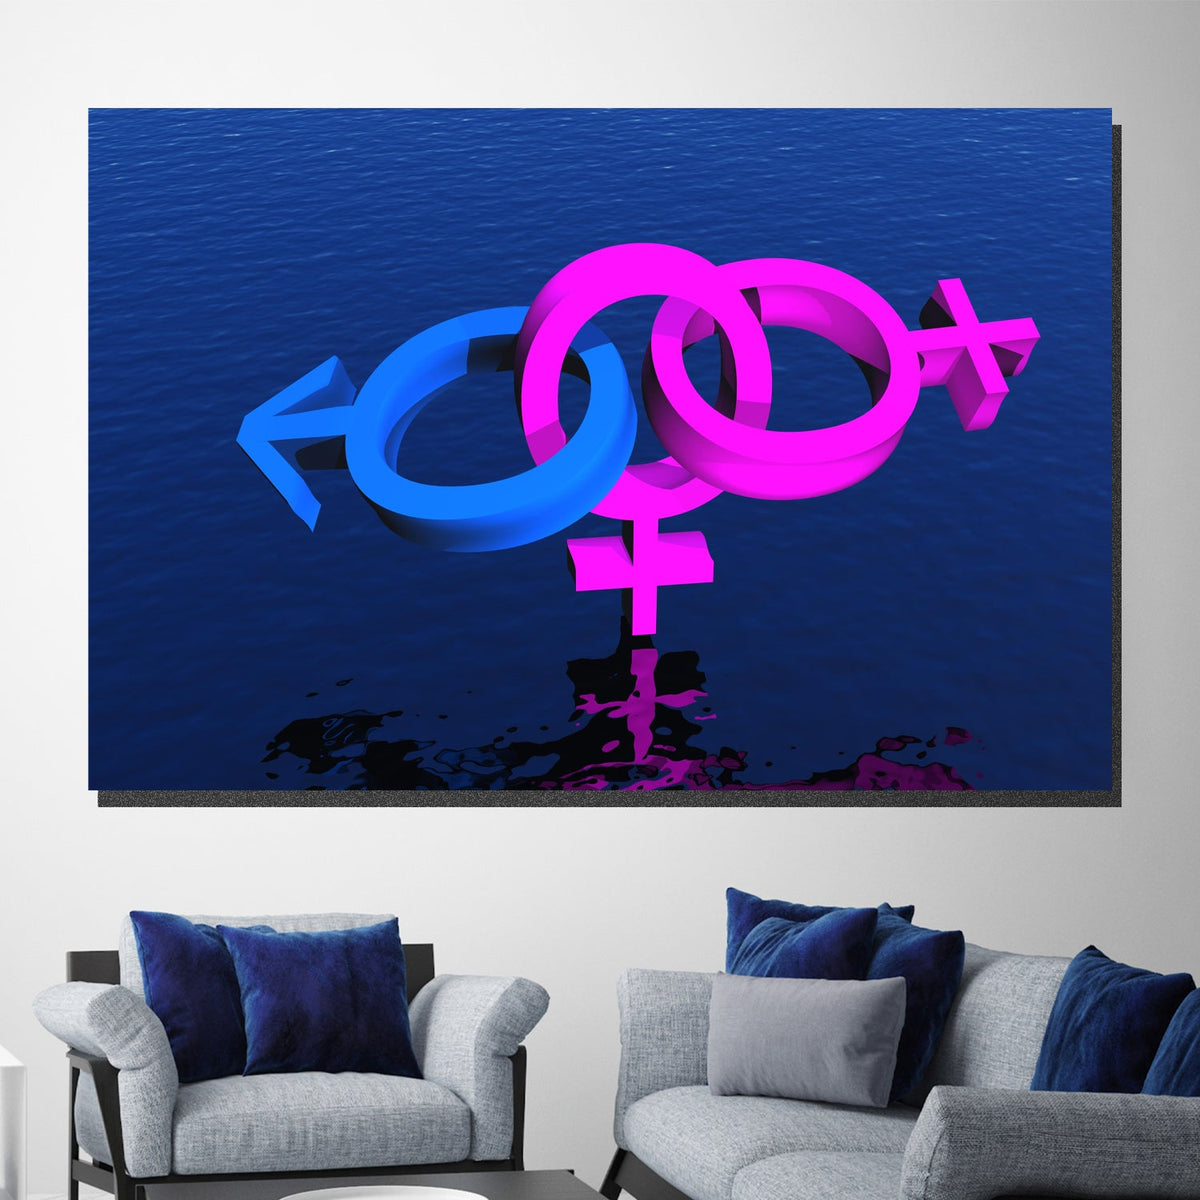 https://cdn.shopify.com/s/files/1/0387/9986/8044/products/BisexualWomanSymbolCanvasArtprintStretched-2.jpg